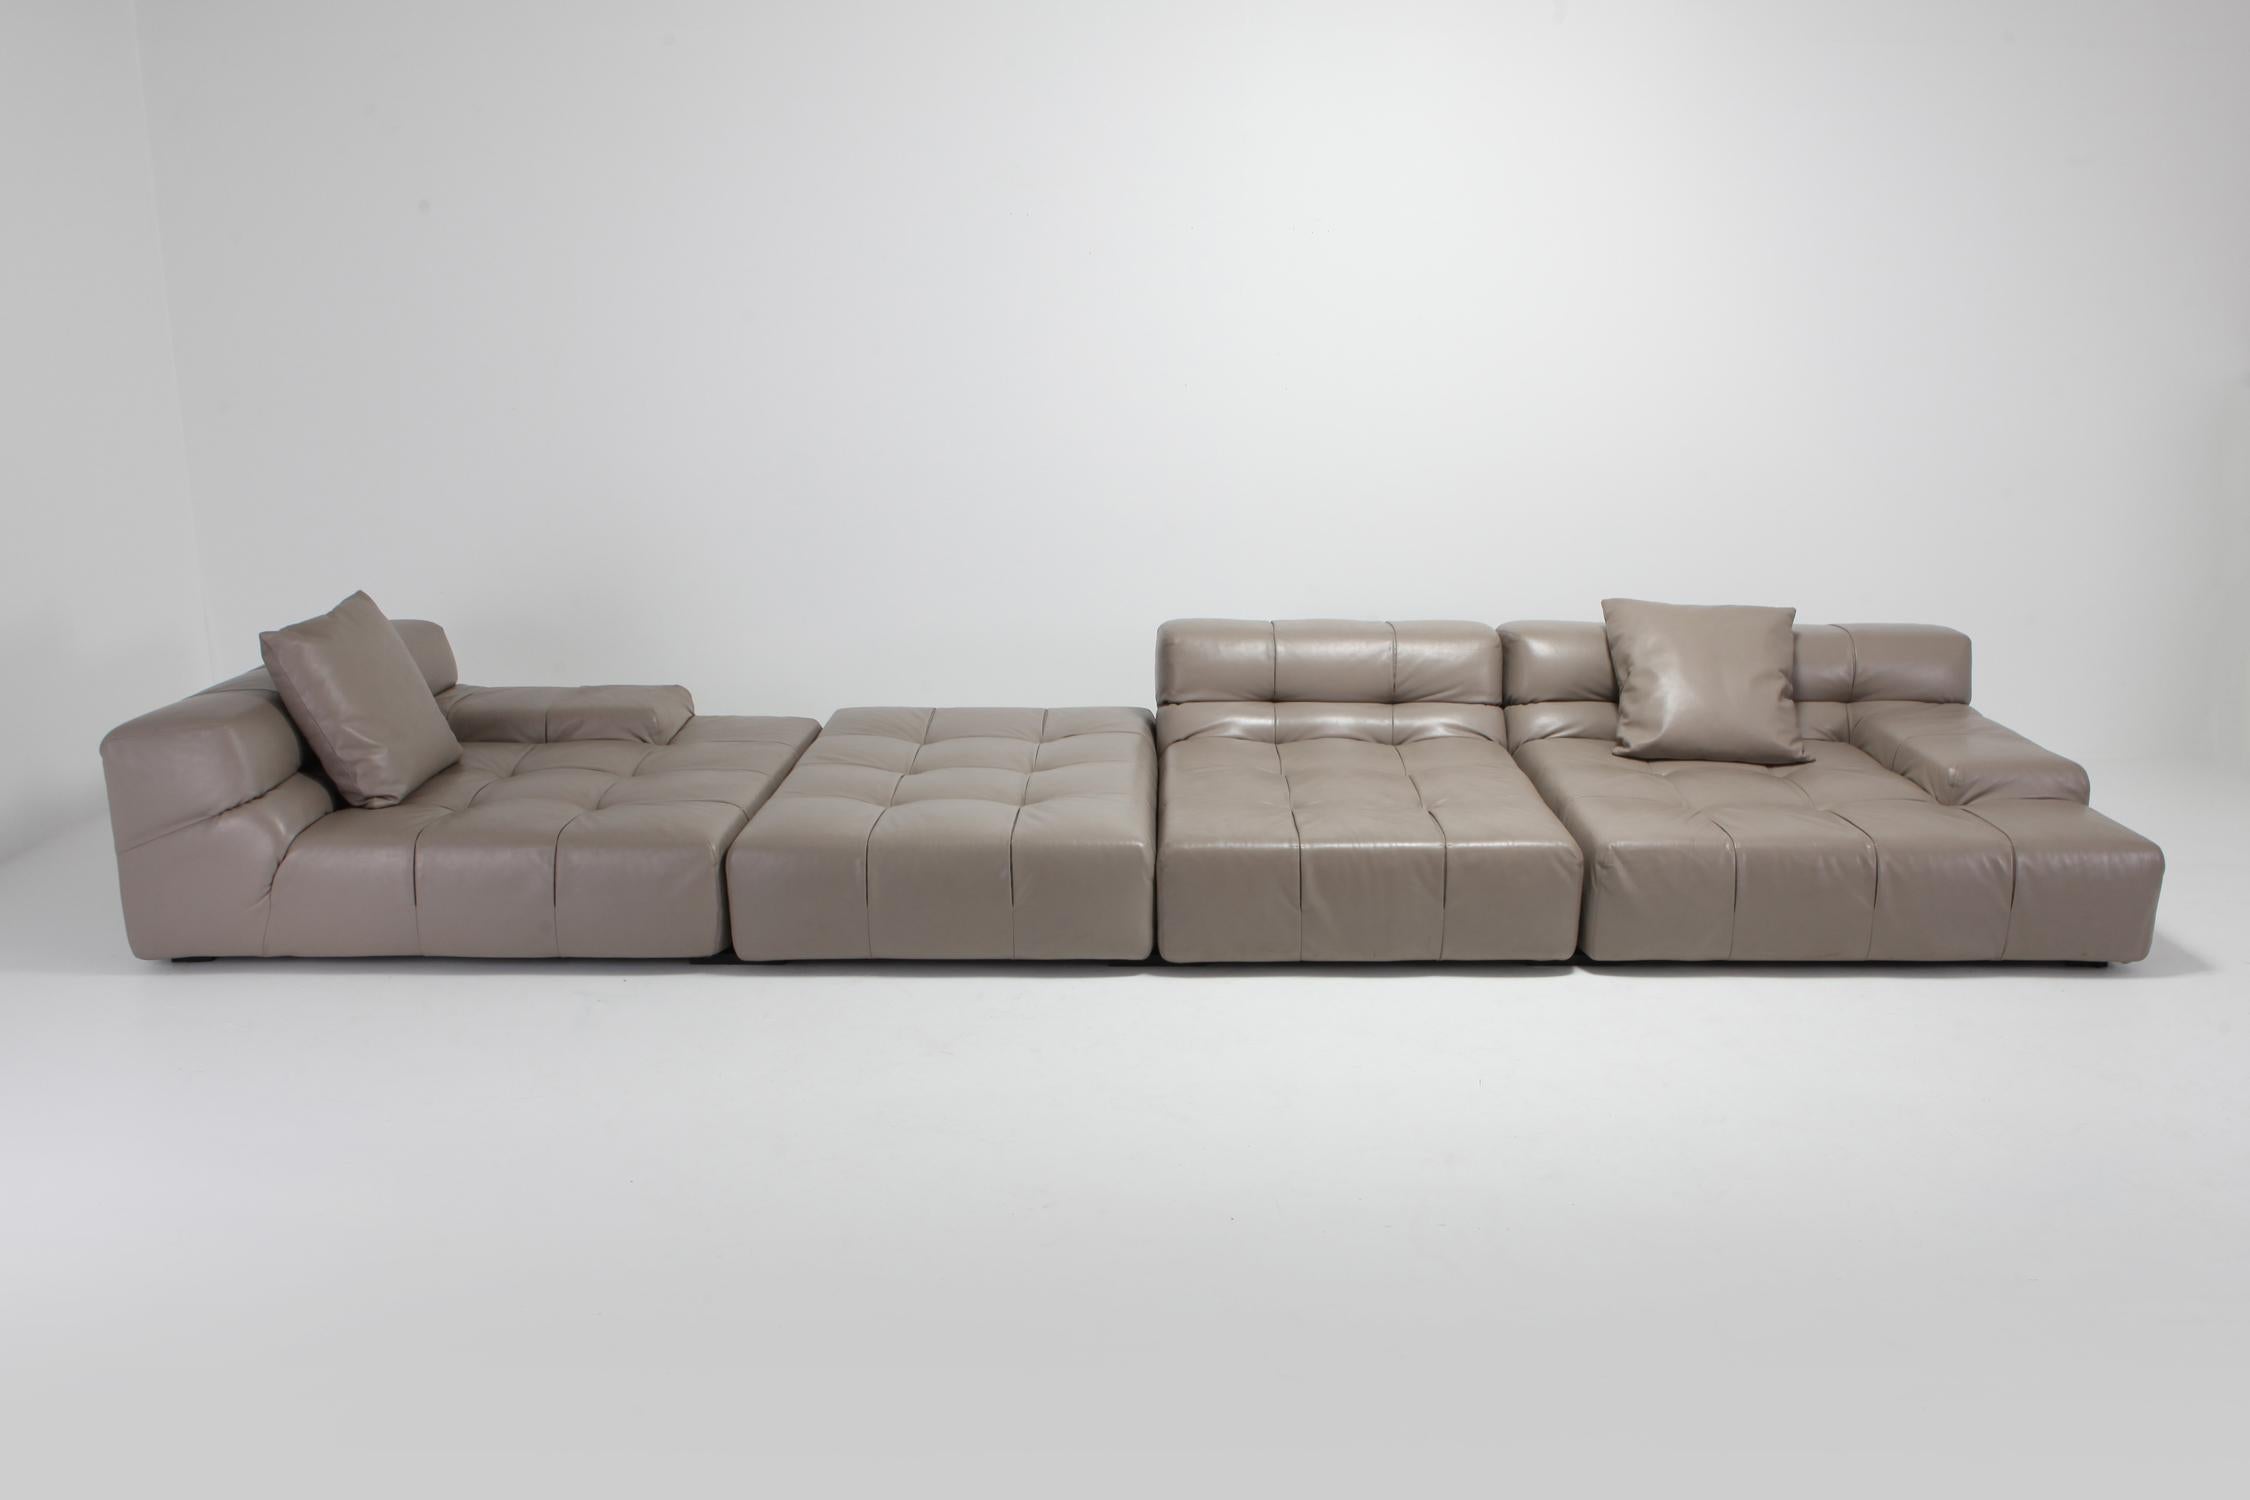 Other Tufty Time B&B Italia Taupe Leather Sectional Sofa by Patricia Urquiola